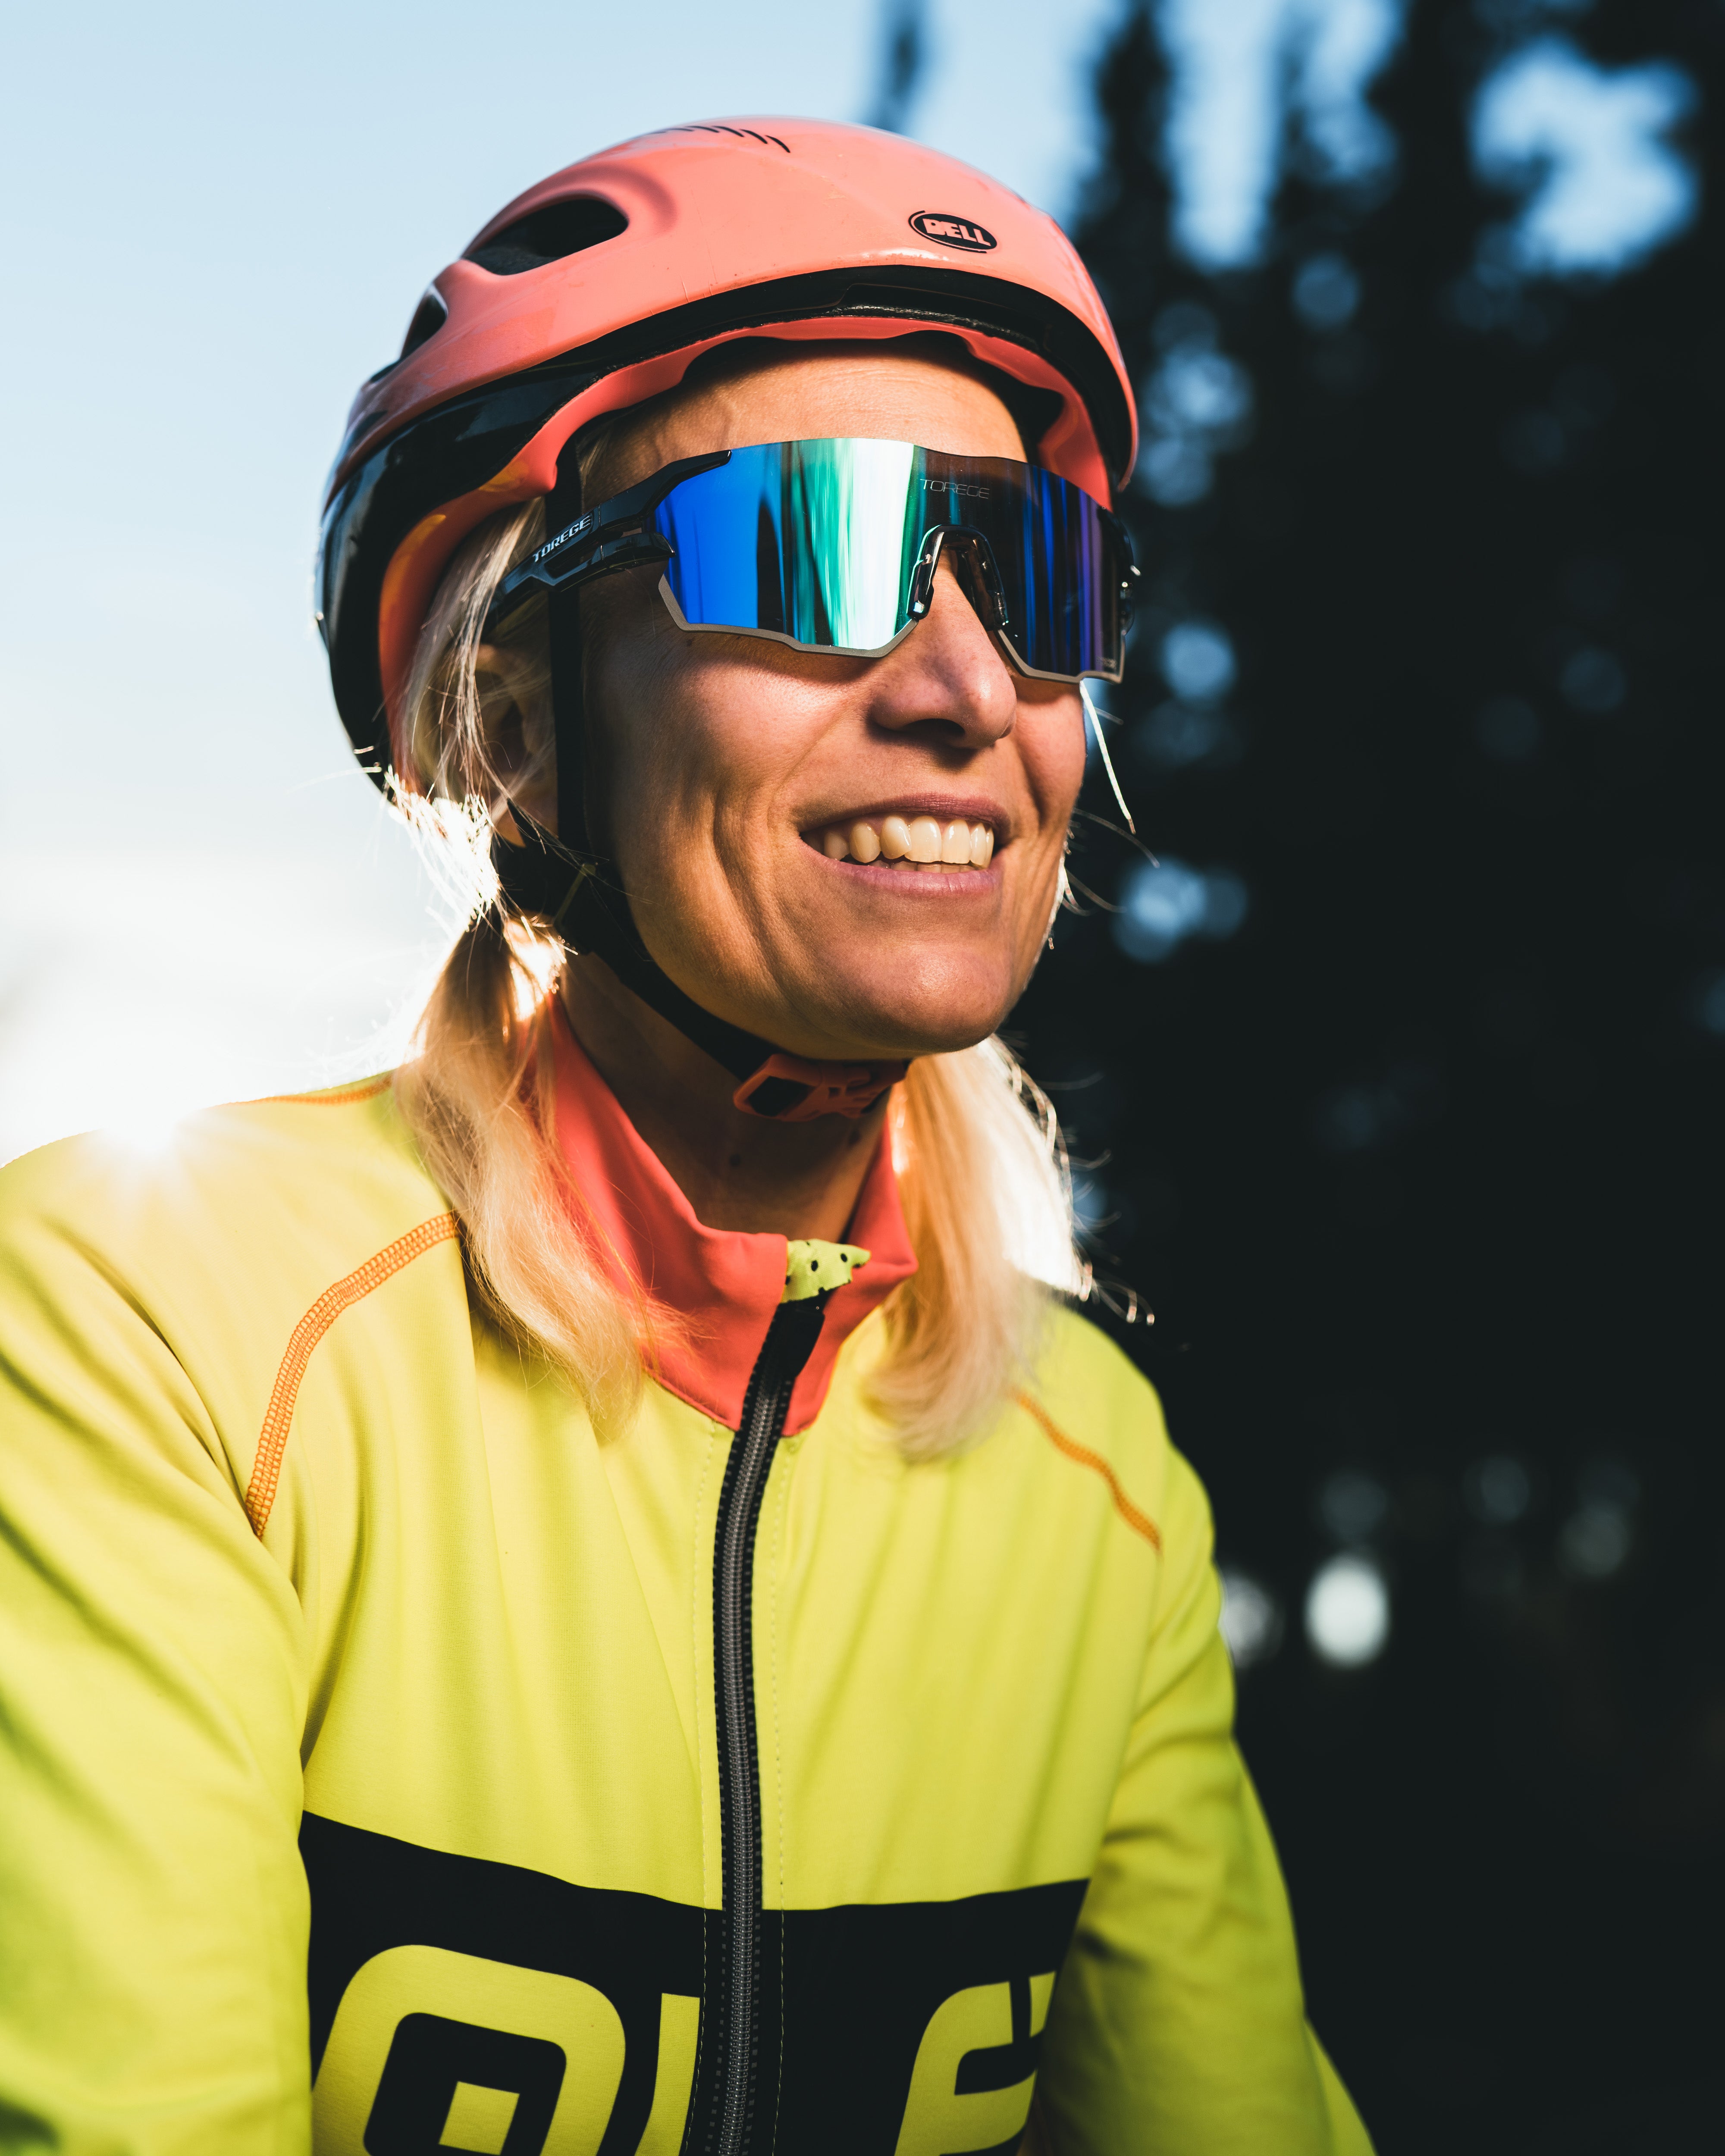 Cycling Safely And In Style: The Best Sunglasses For Bike Commuters